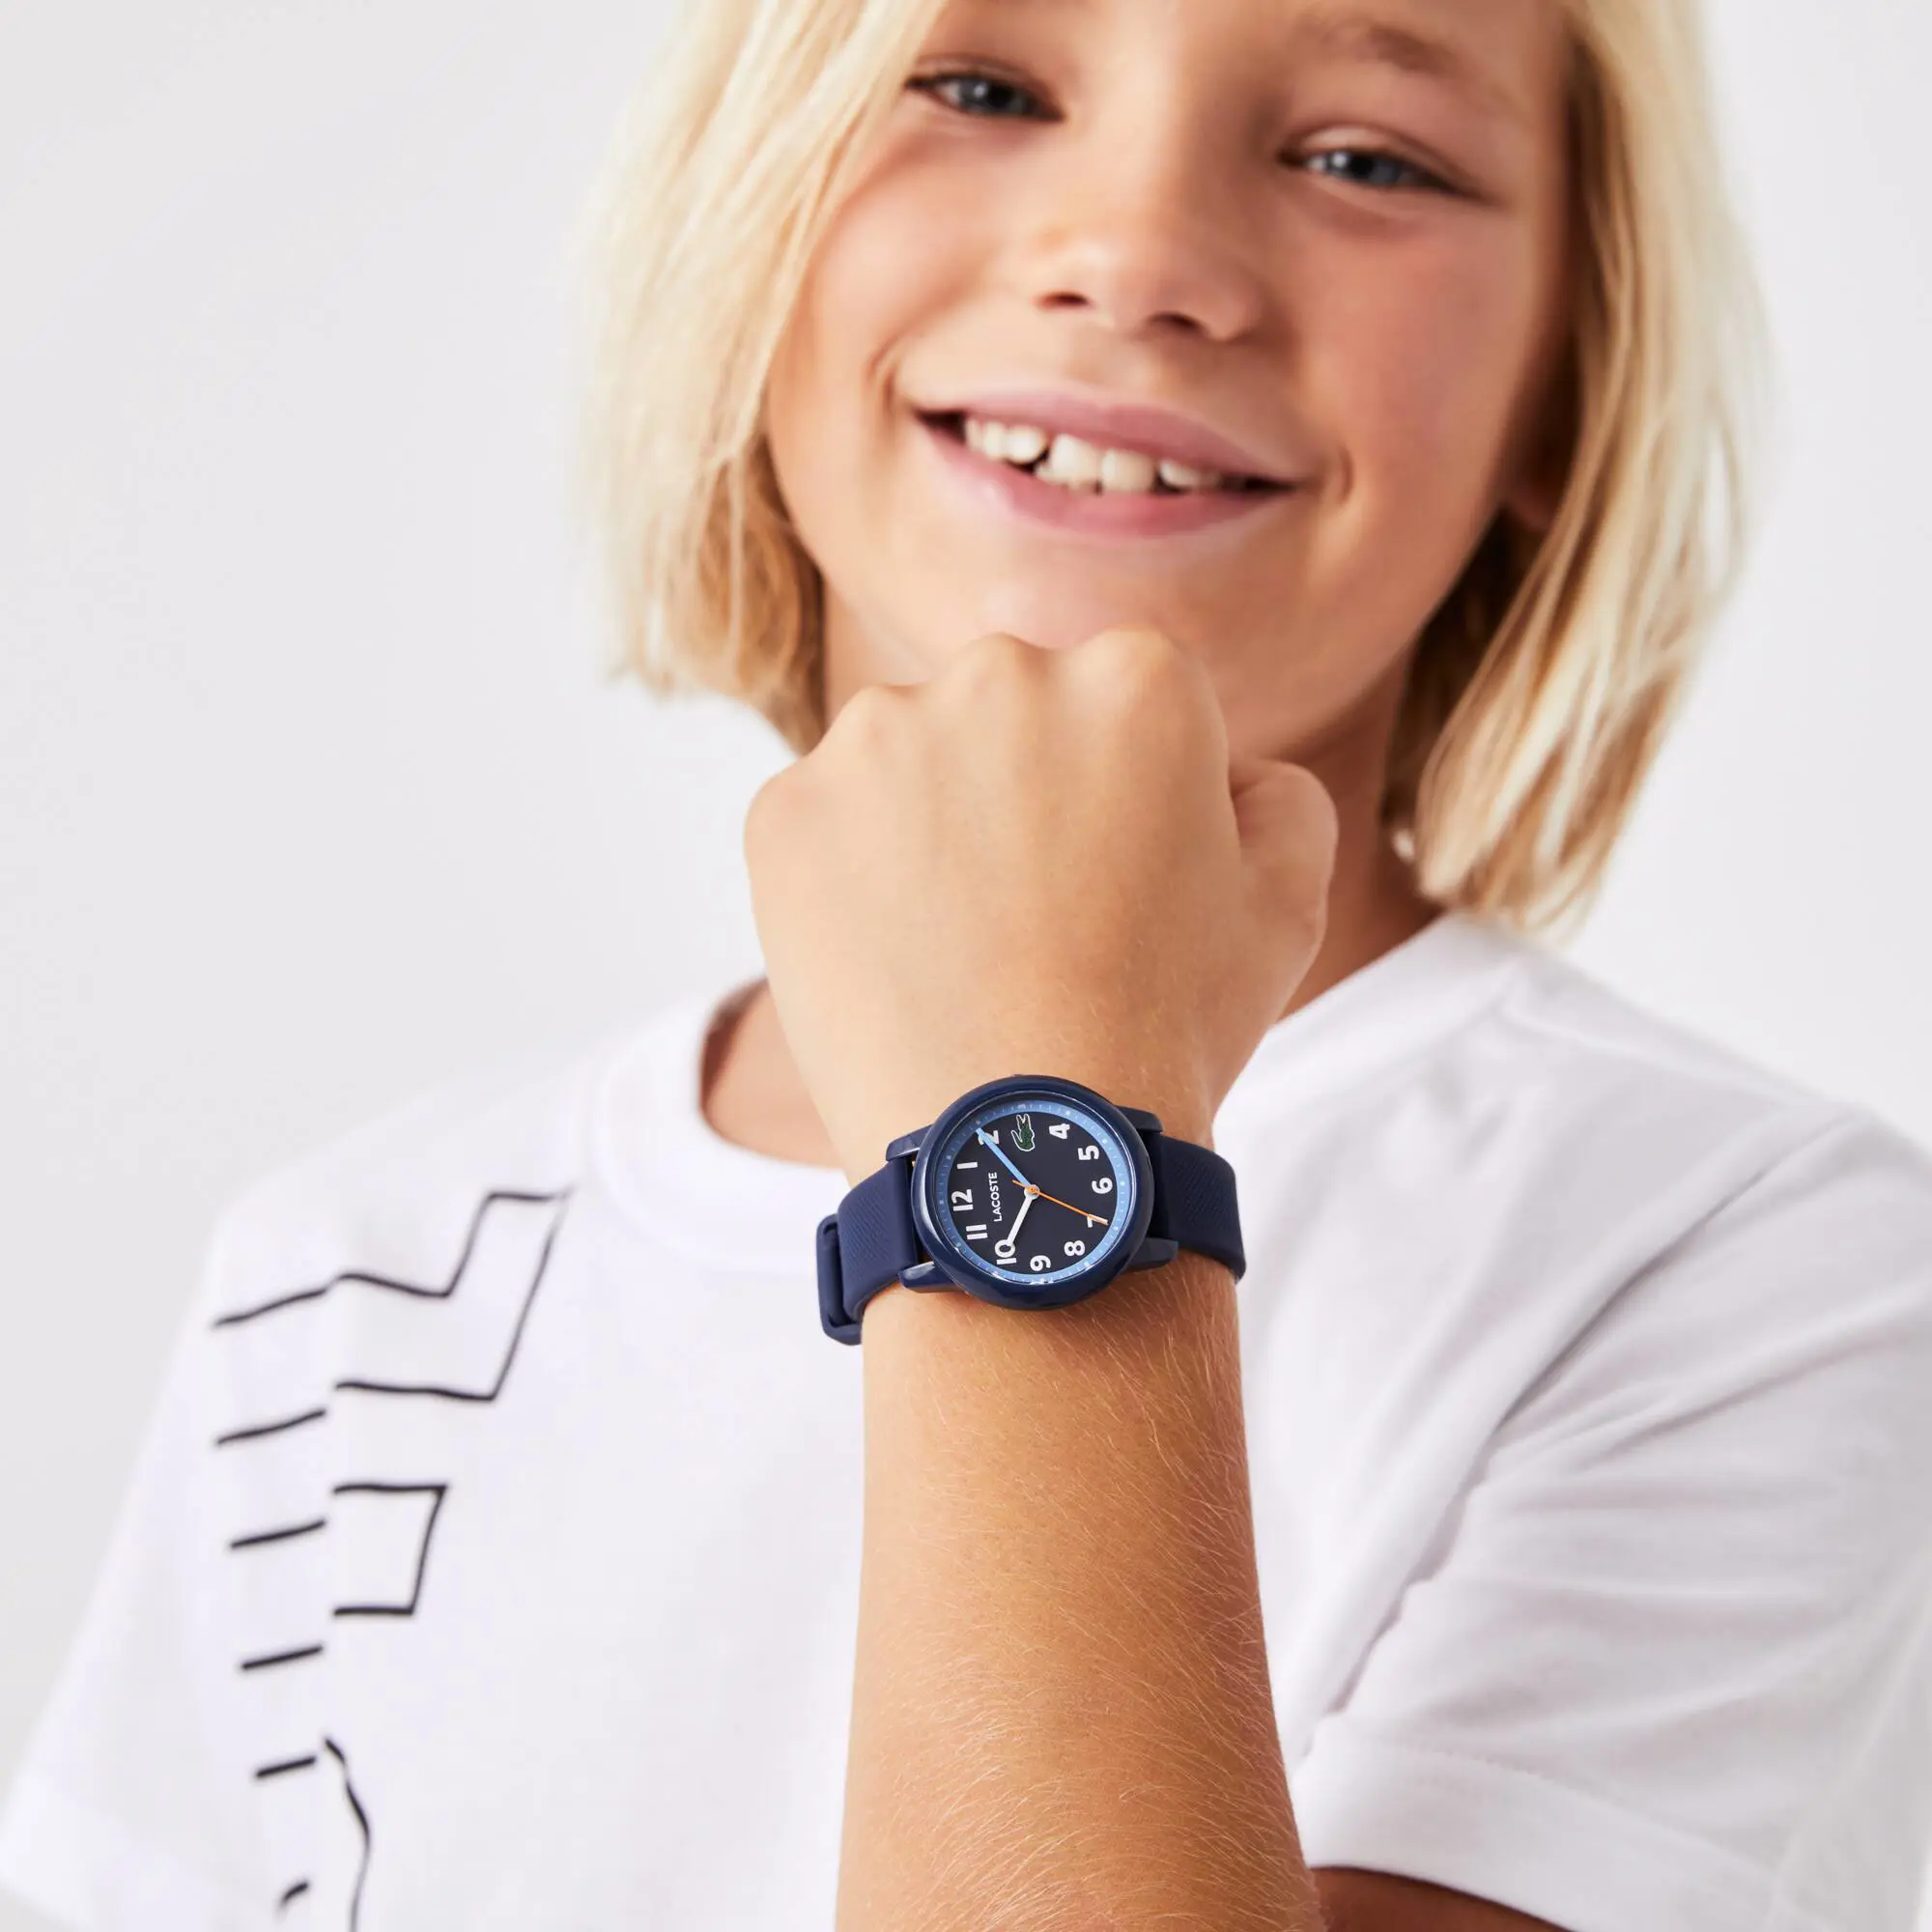 Lacoste Kids’ Lacoste.12.12 3 Hands Silicone Strap Watch. 1